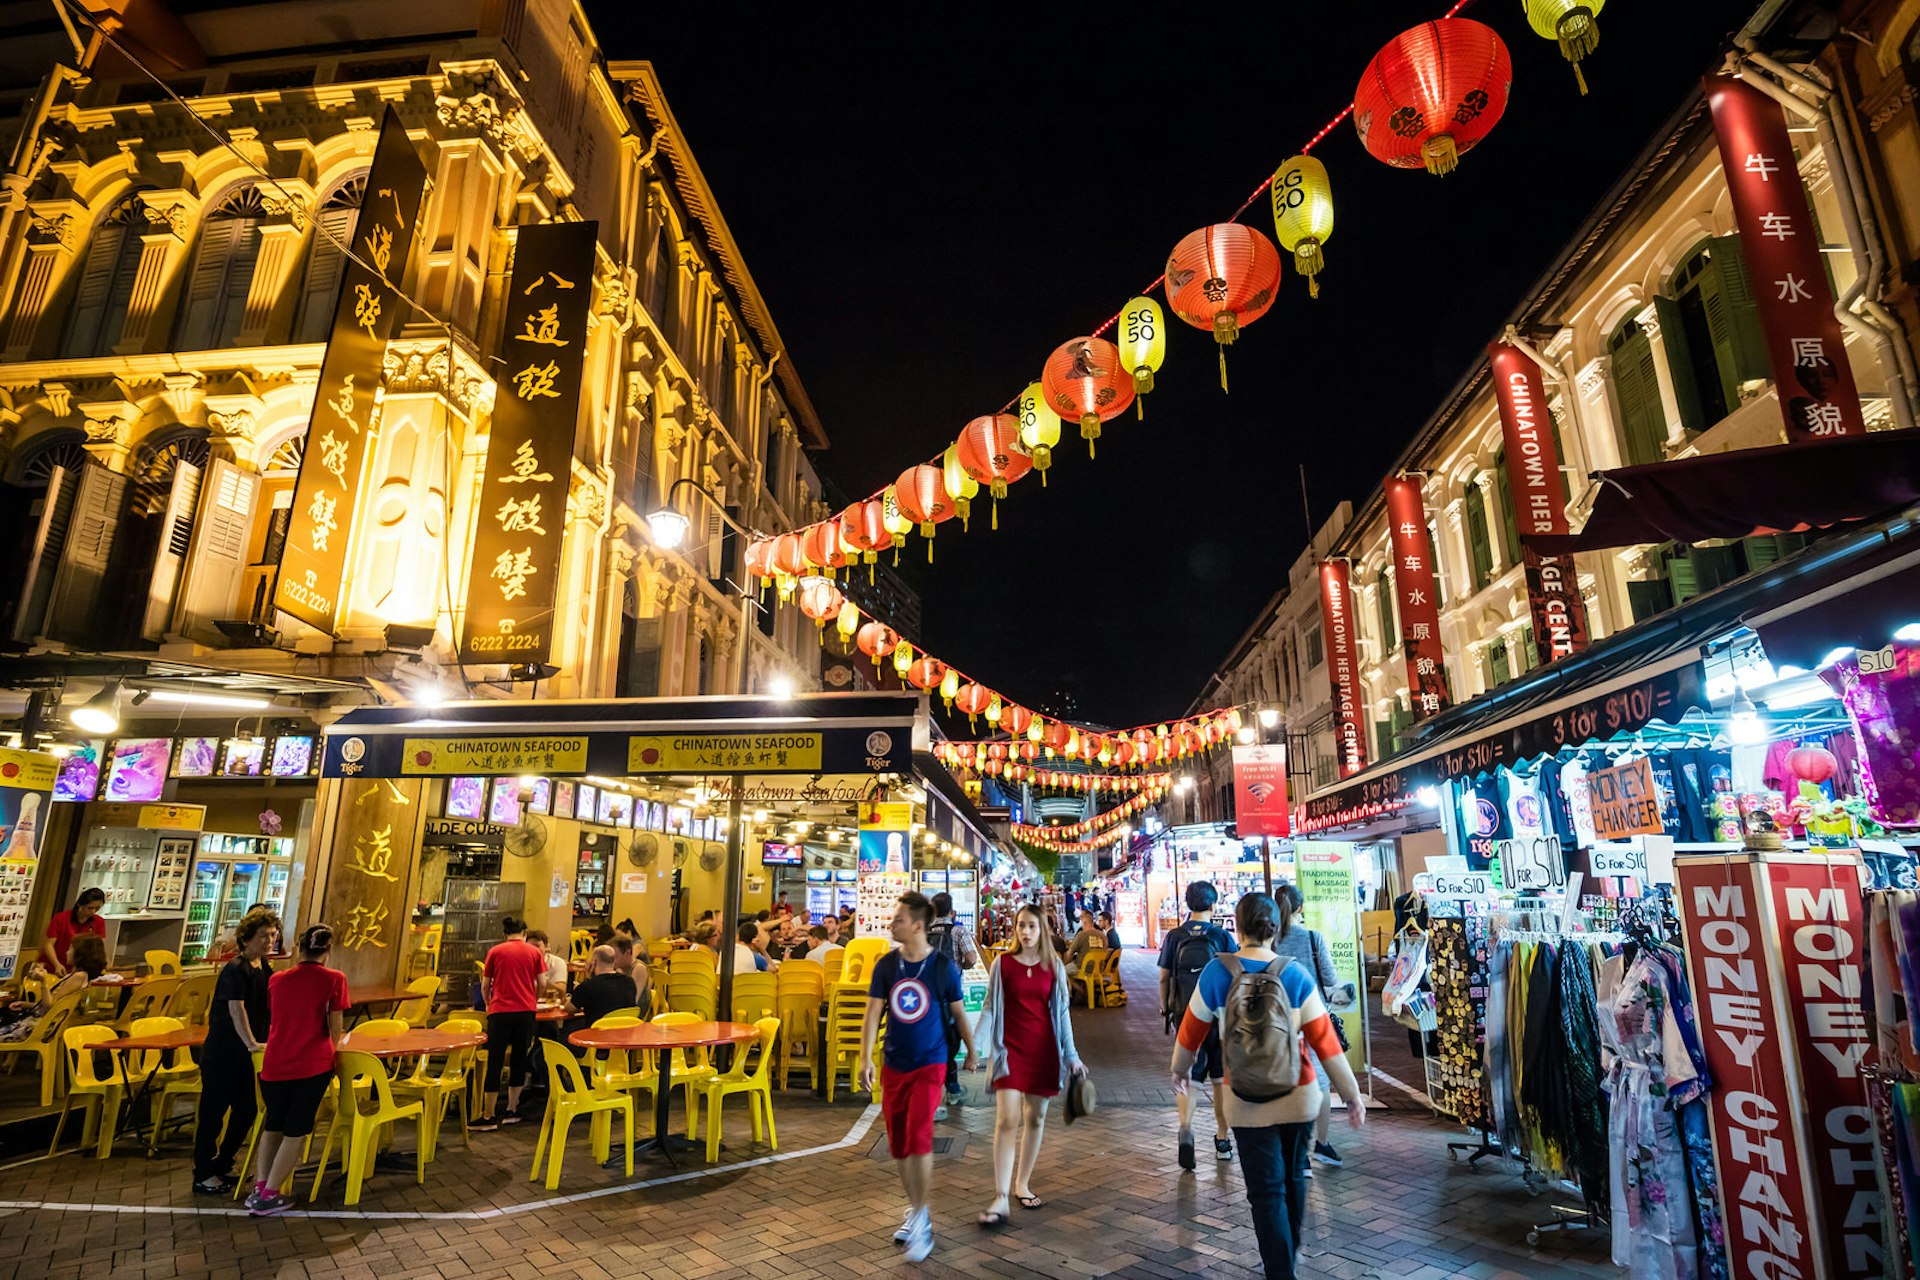 The Chinatown district in the heart of Singapore